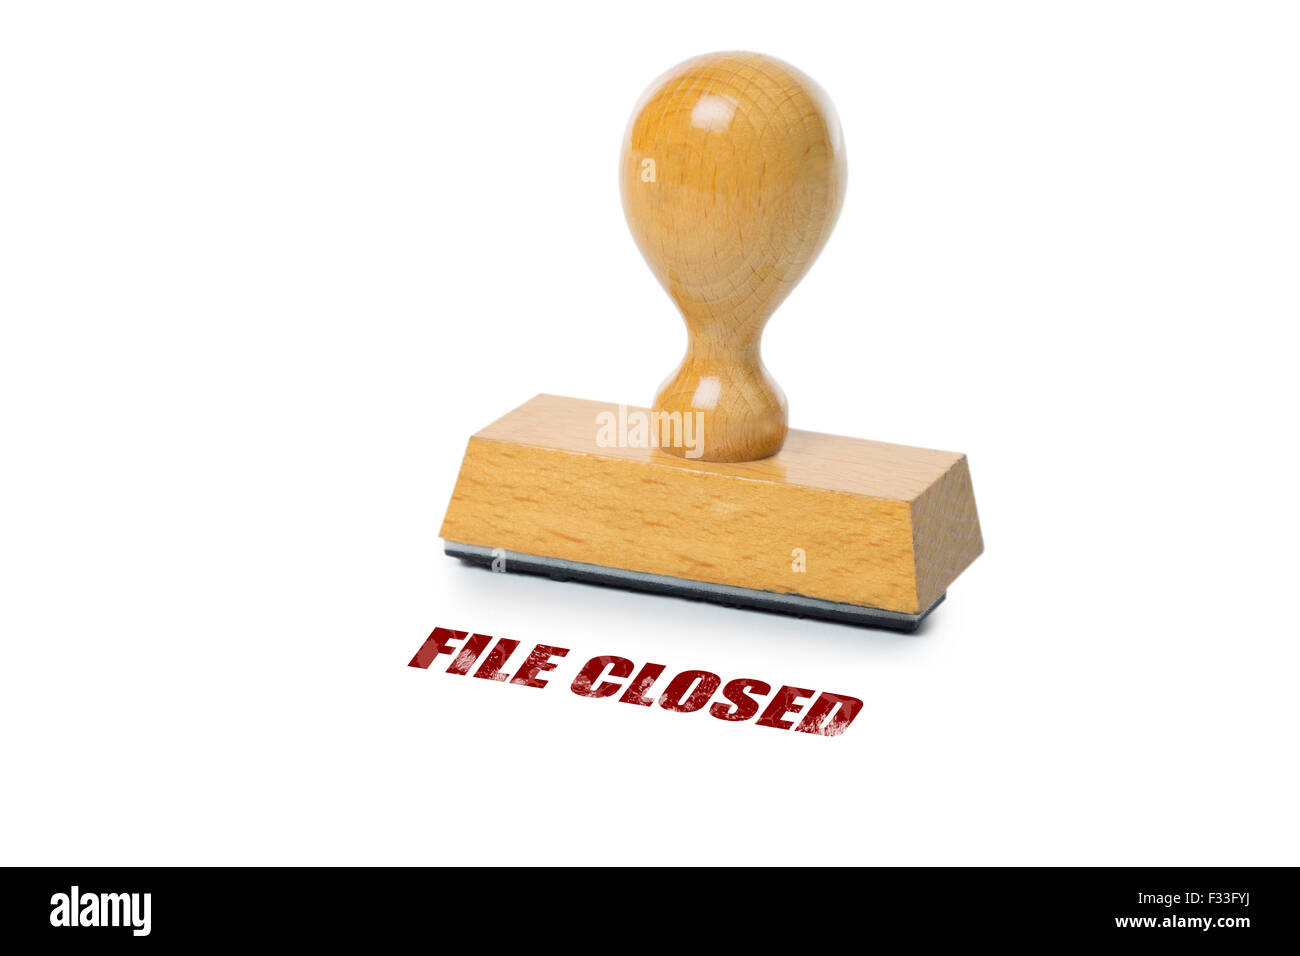 File Closed printed in red ink with wooden Rubber stamp isolated on white background Stock Photo